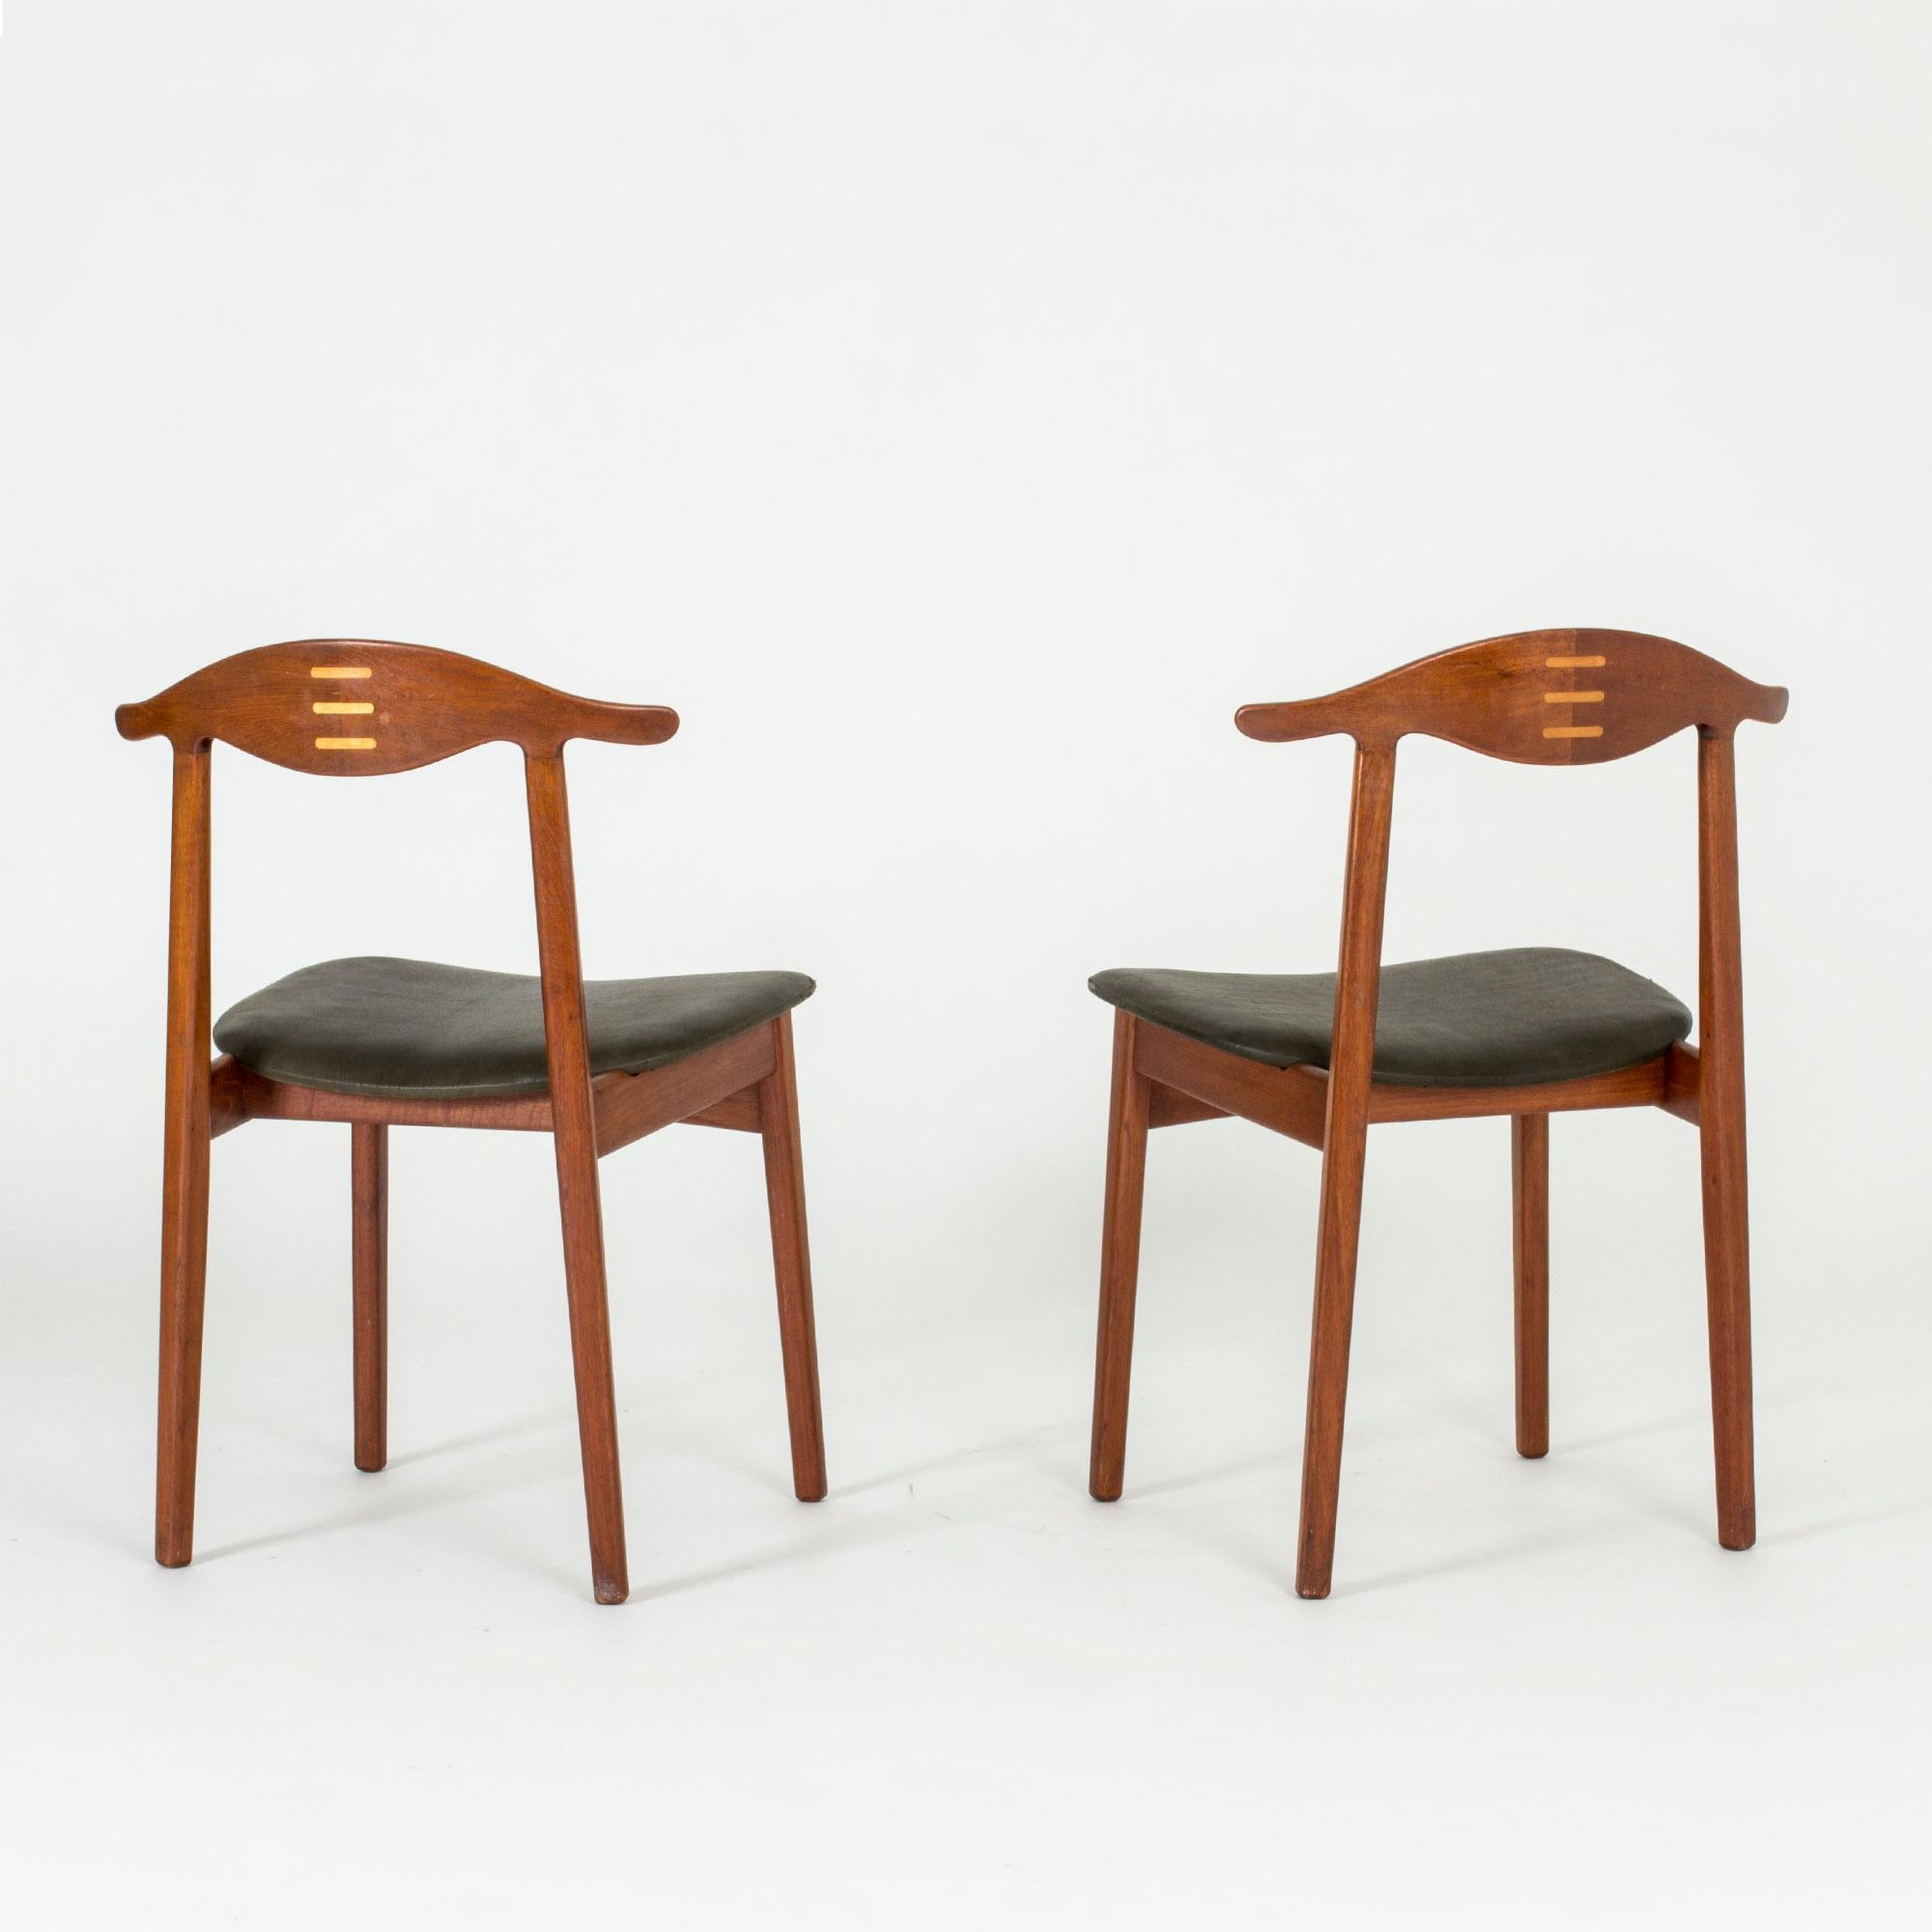 Scandinavian Modern Set of Four Midcentury Dining Chairs by Knud Færch